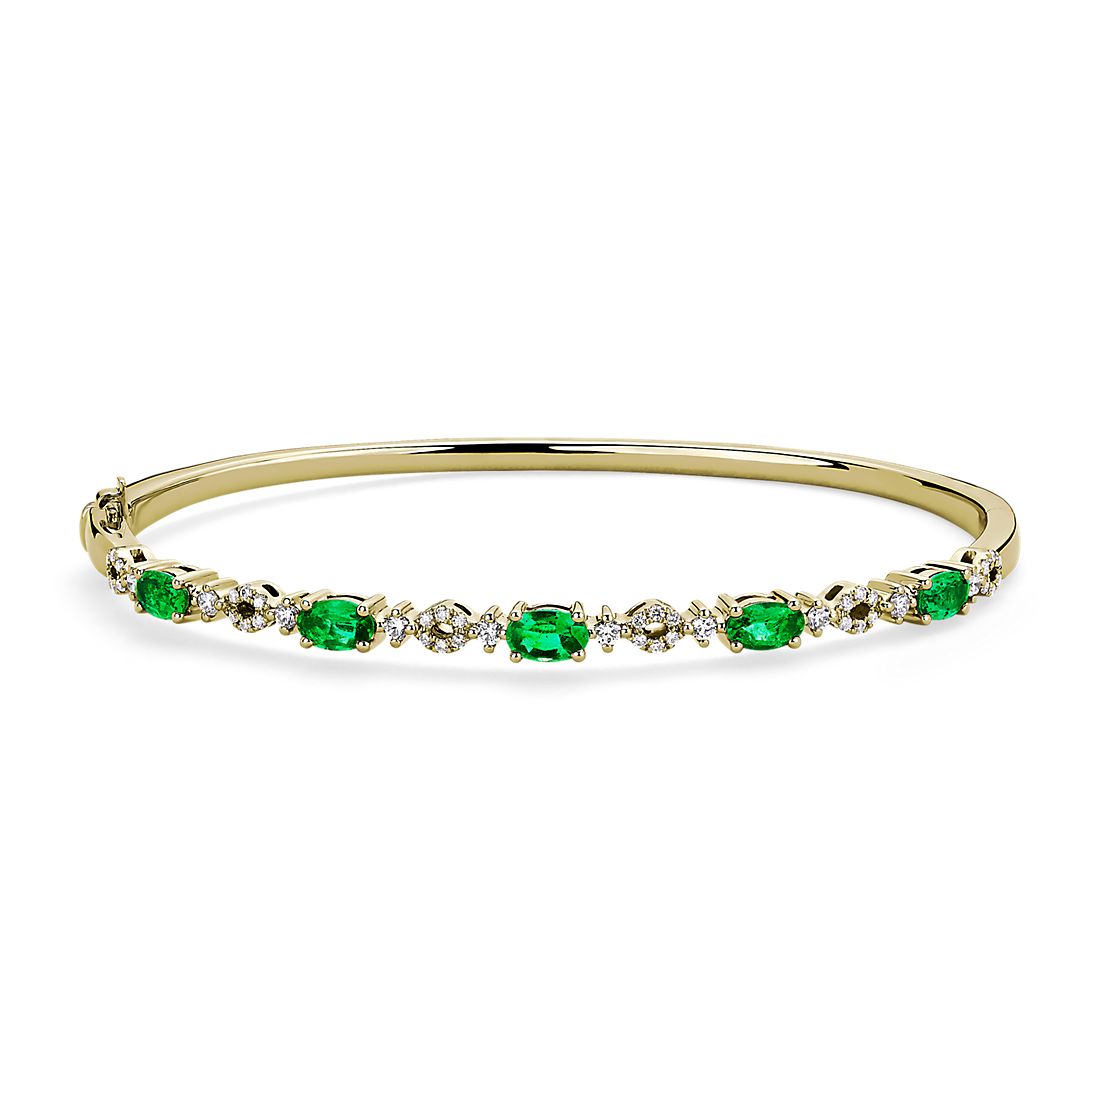 Oval Emerald and Diamond Bangle in 14k Yellow Gold (5x3mm)